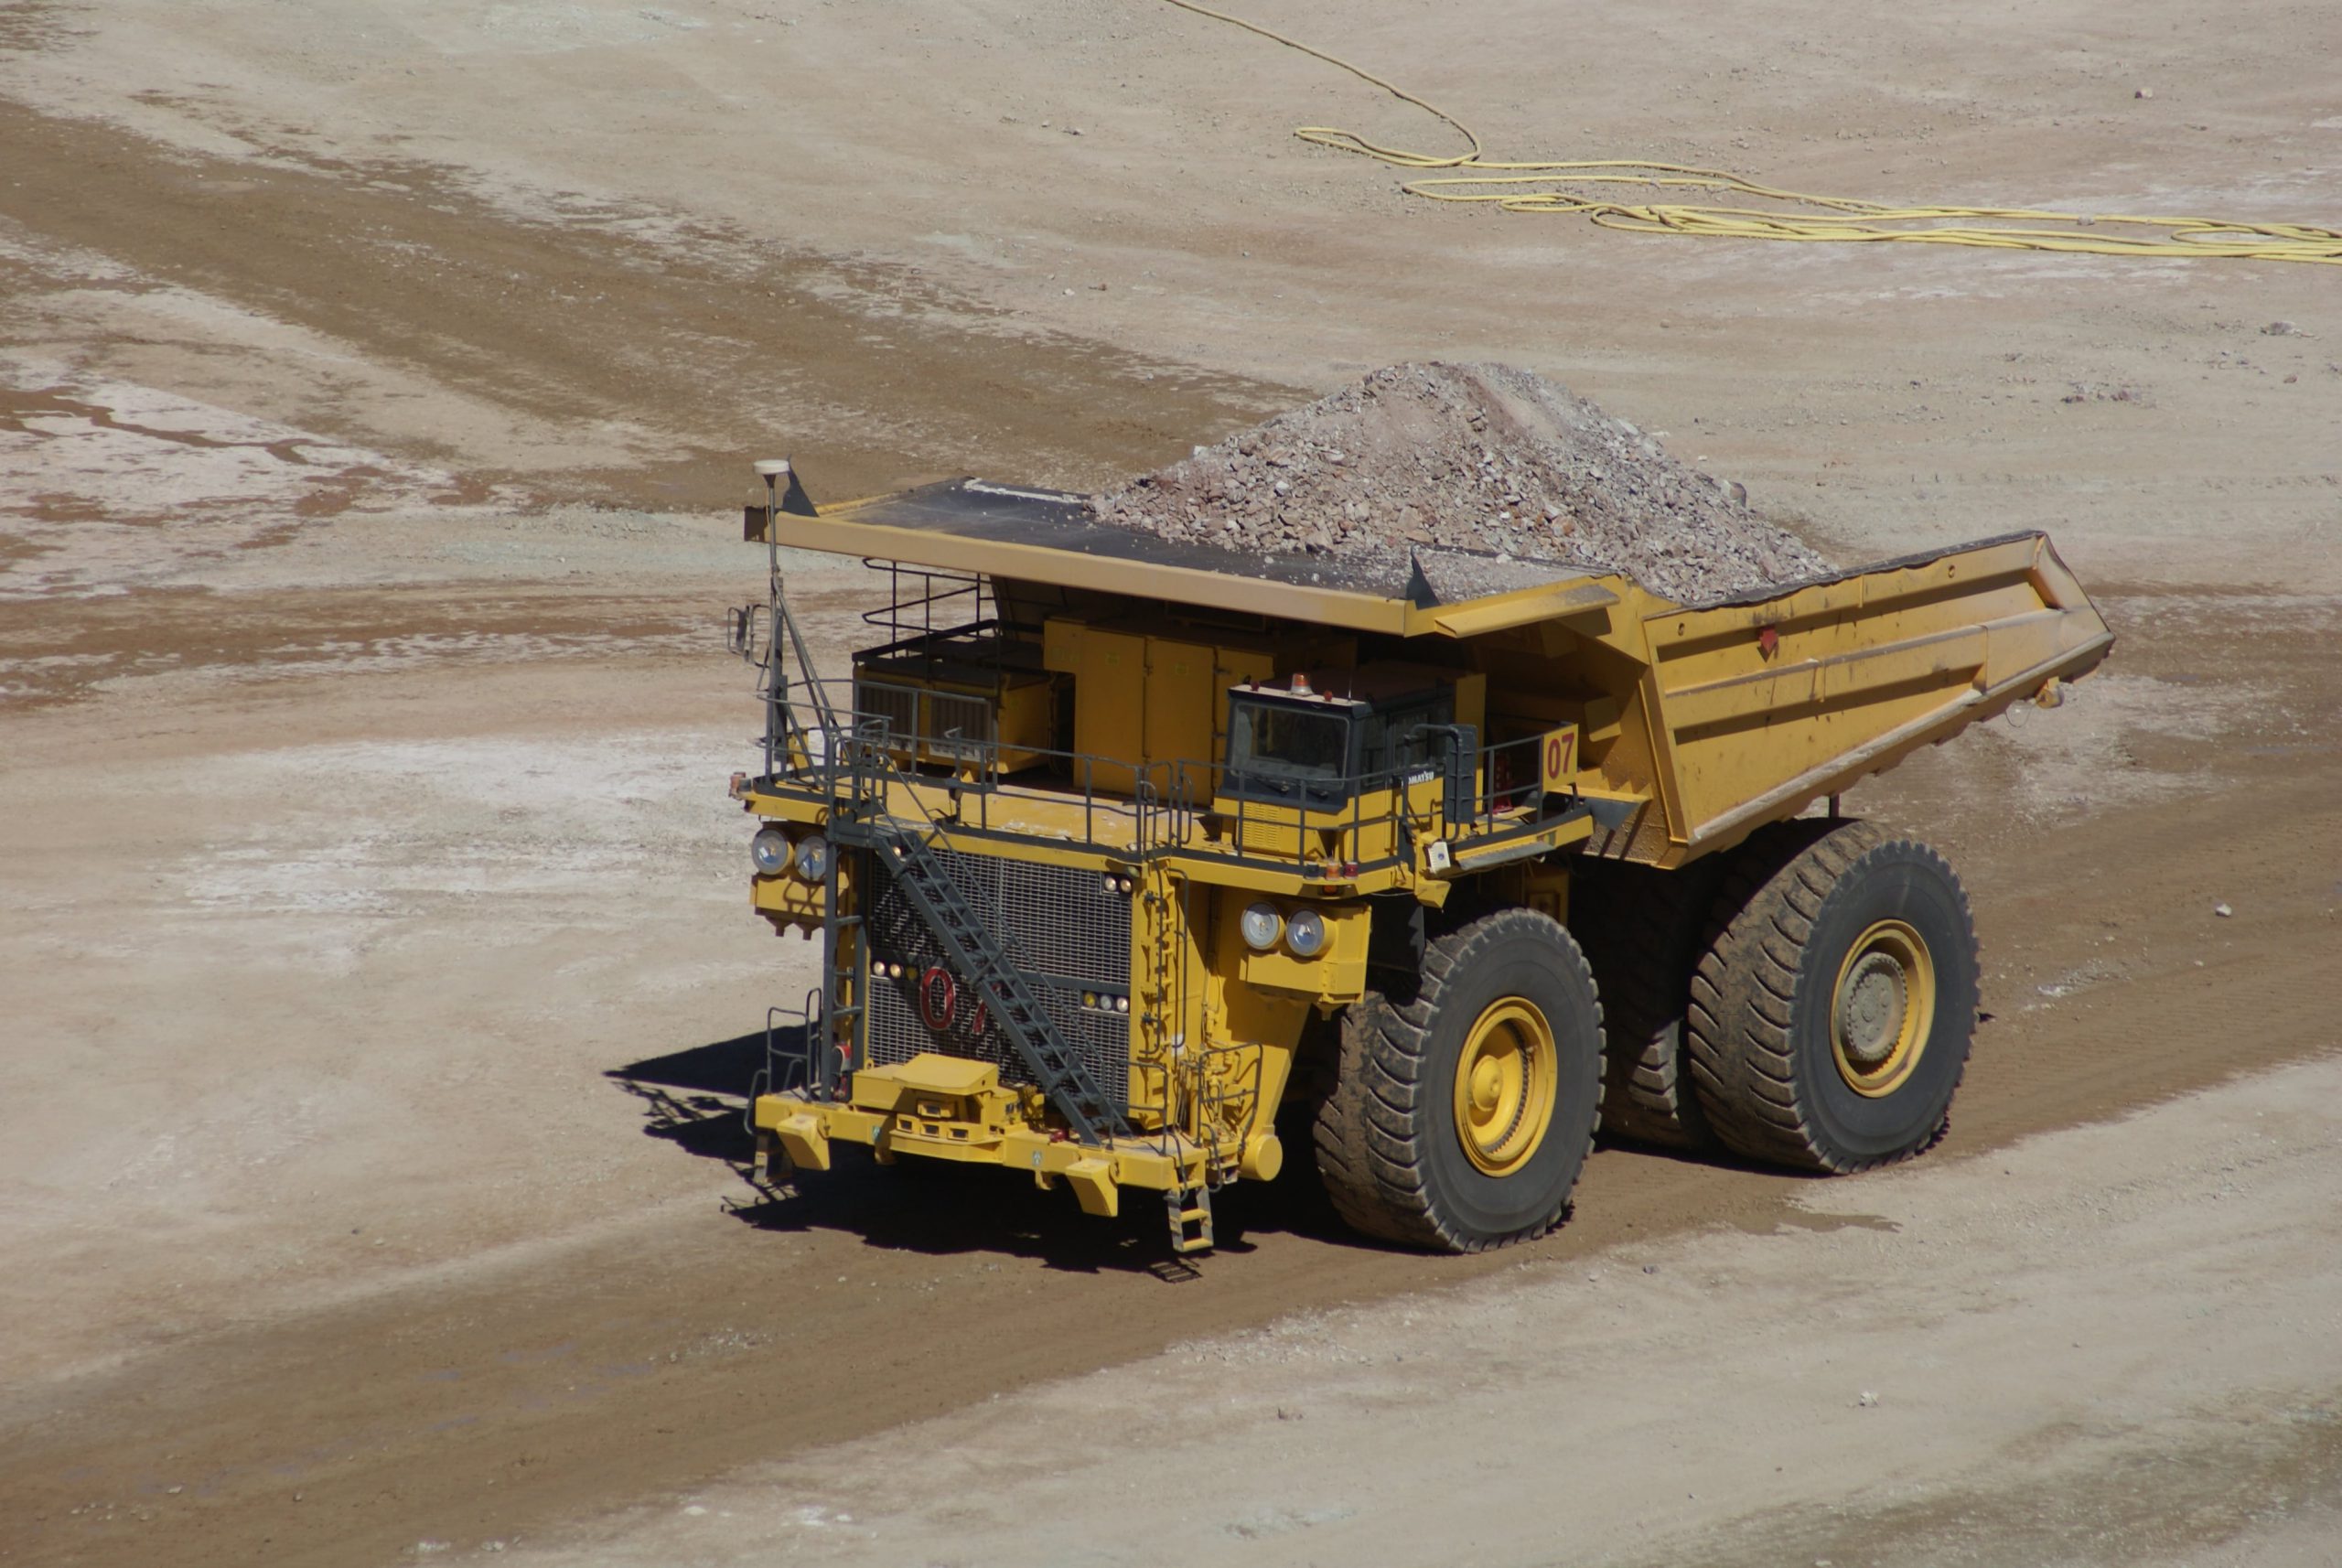 Codelco presses ahead with automation plans to bolster production